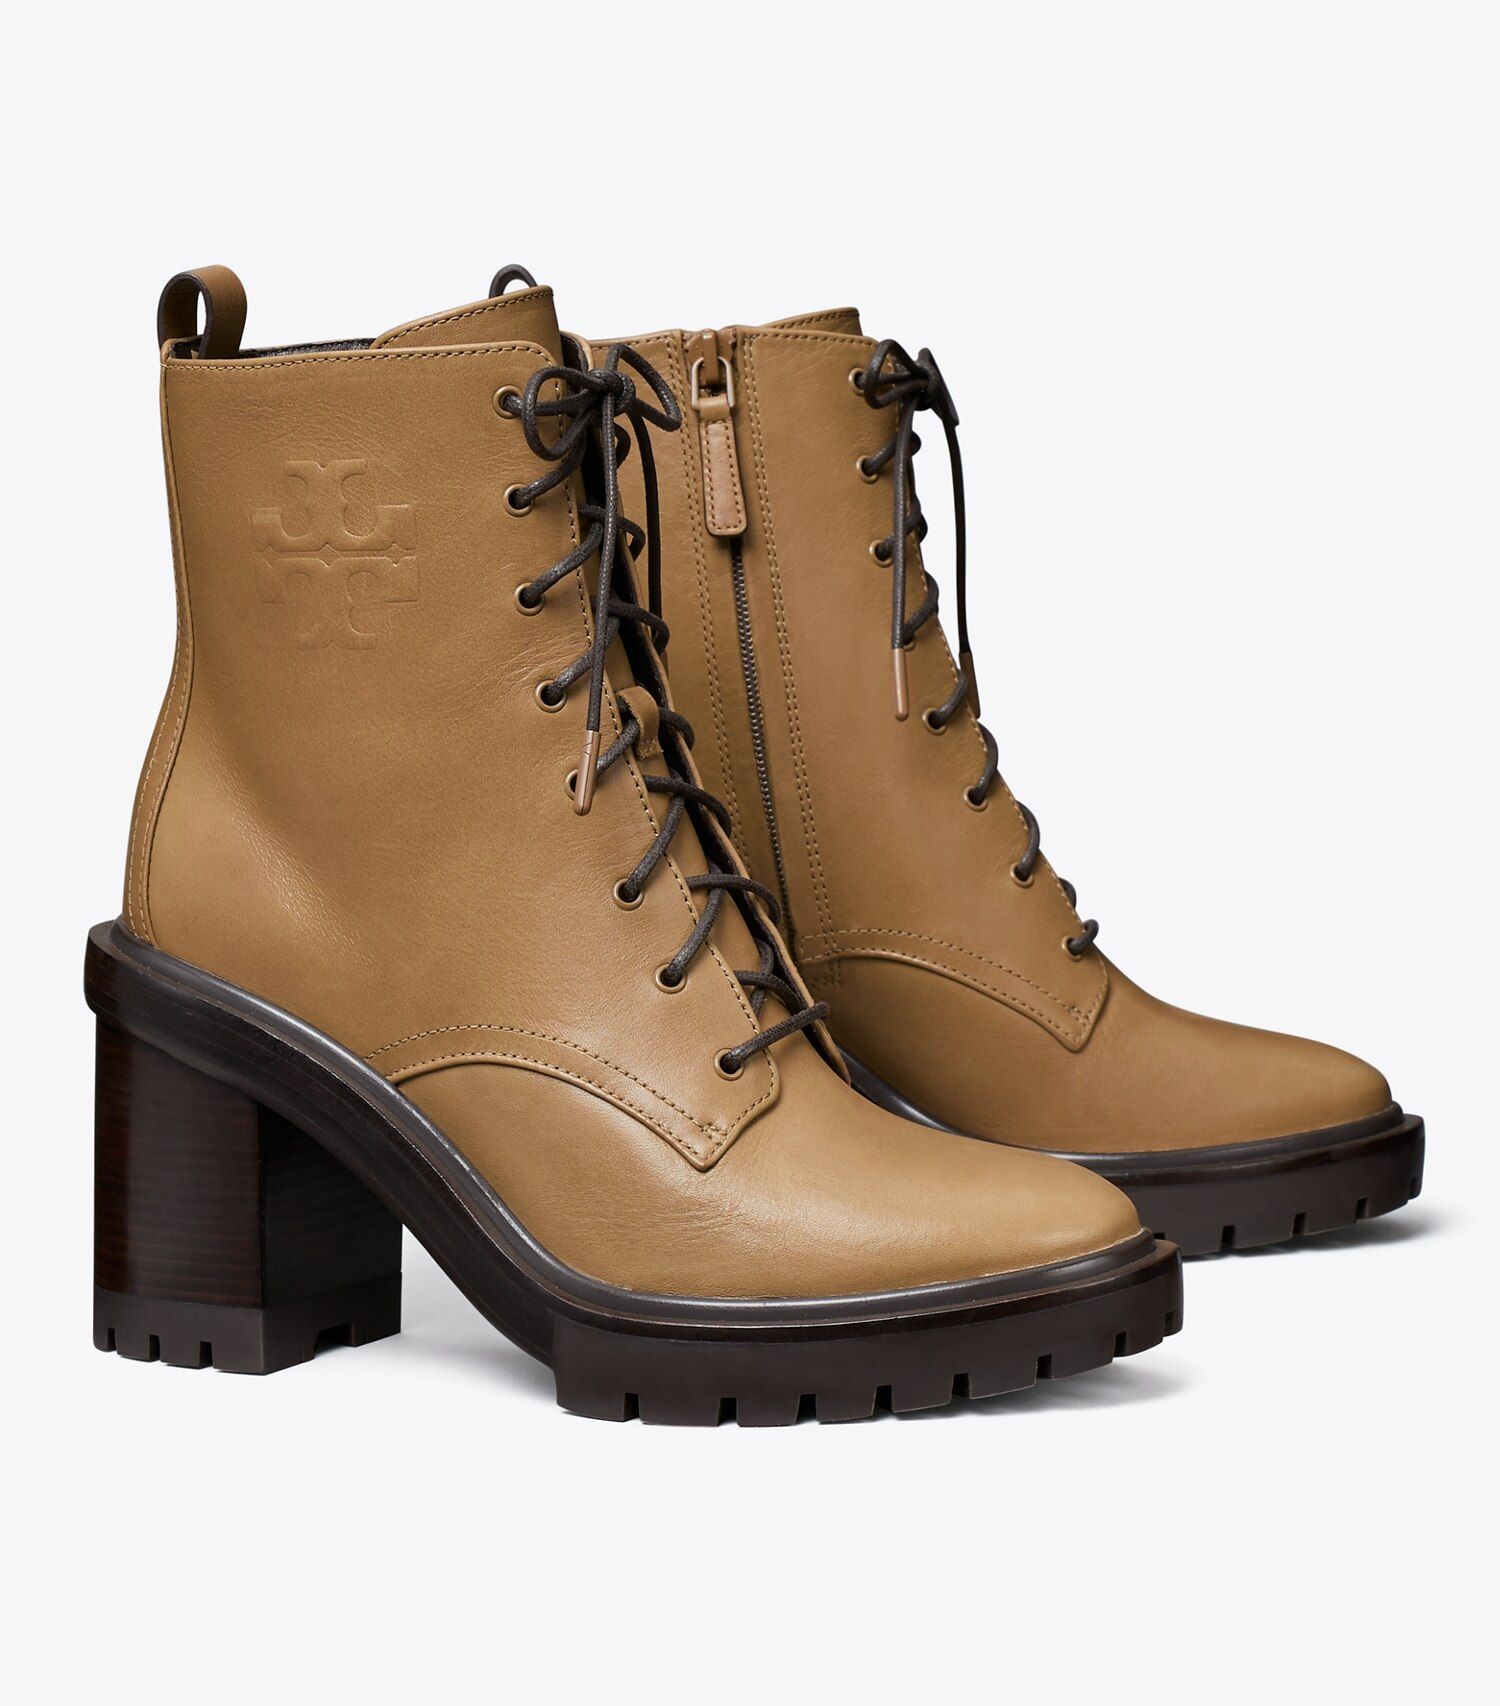 Double T Lug Boot: Women's Designer Ankle Boots | Tory Burch | Tory Burch (US)